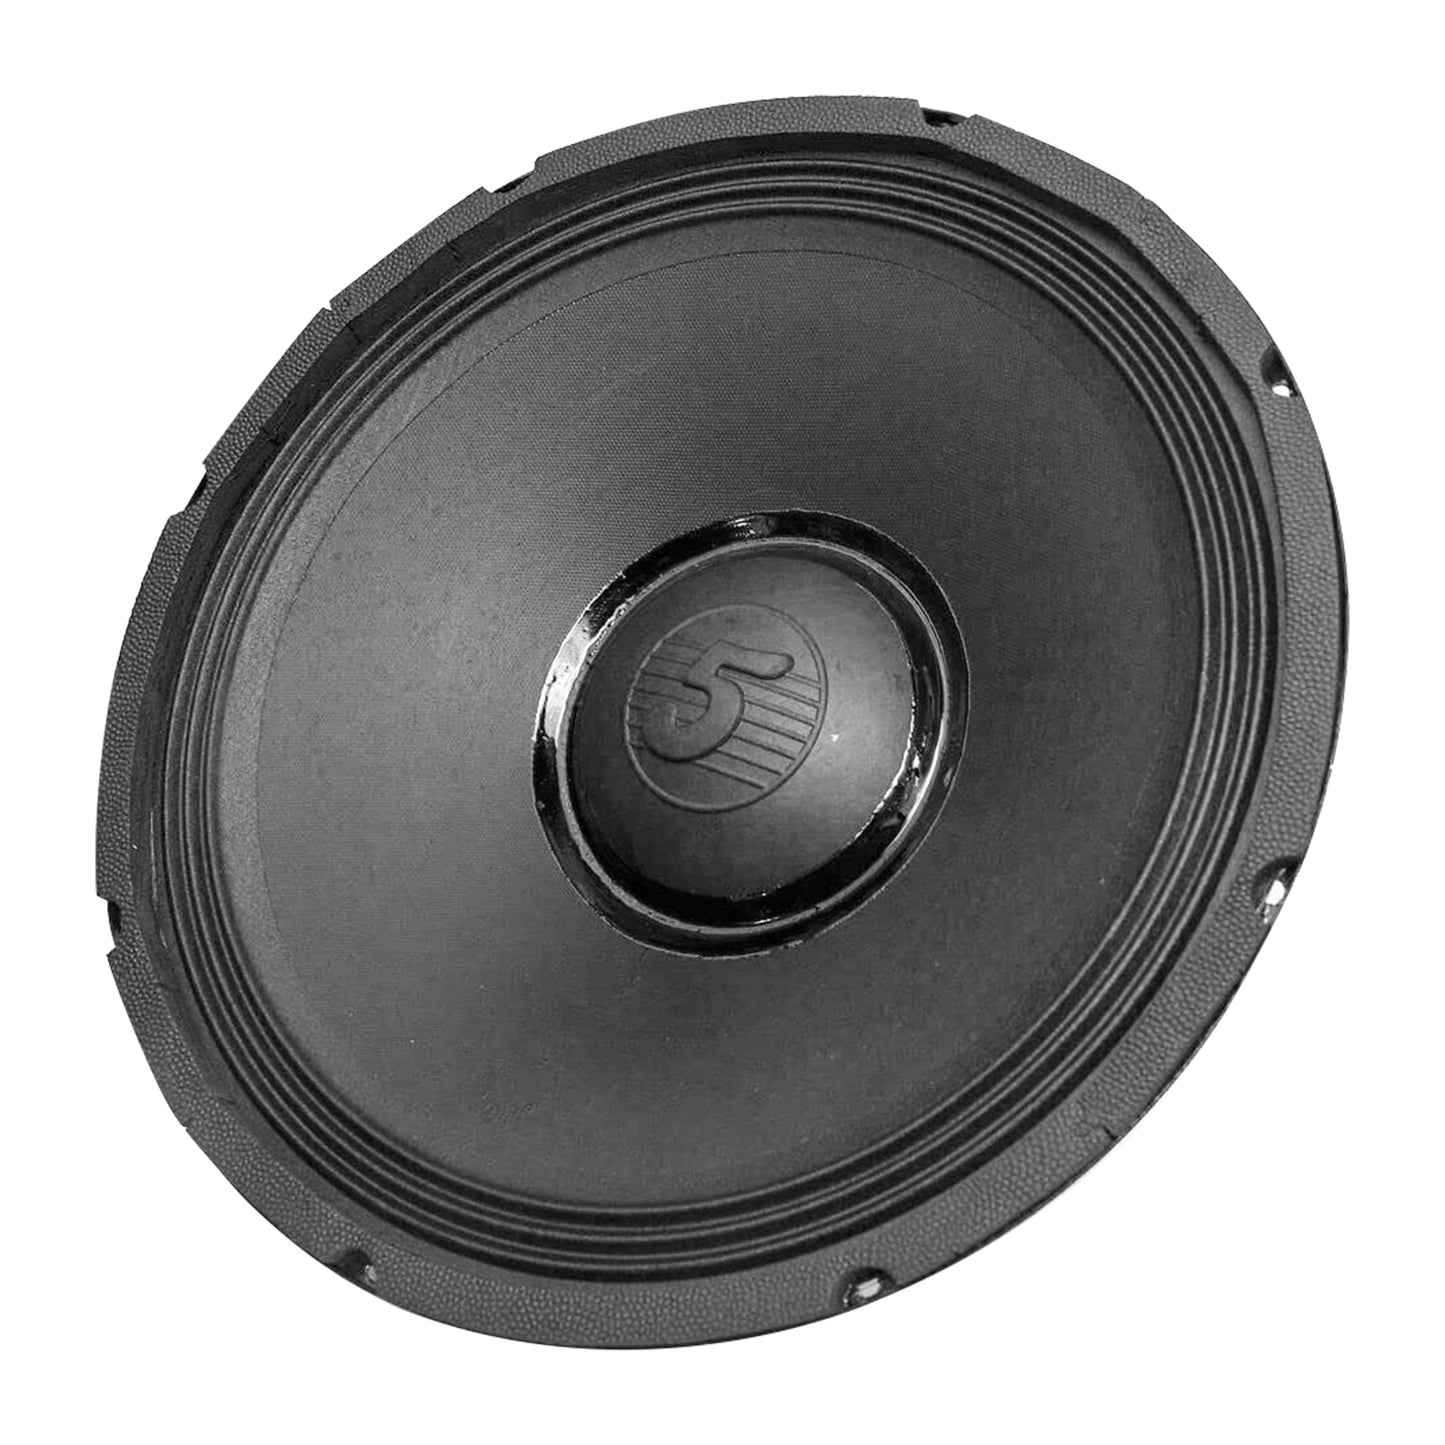 5 Core Subwoofer Speaker | 15inch PA DJ Subwoofer With  250W RMS, Hi-Temp 2.5 Inch Voice Coil, 8 Ohm Impedance, 185MM Magnet, Bass Surround Speaker- 15-185 MS 250W